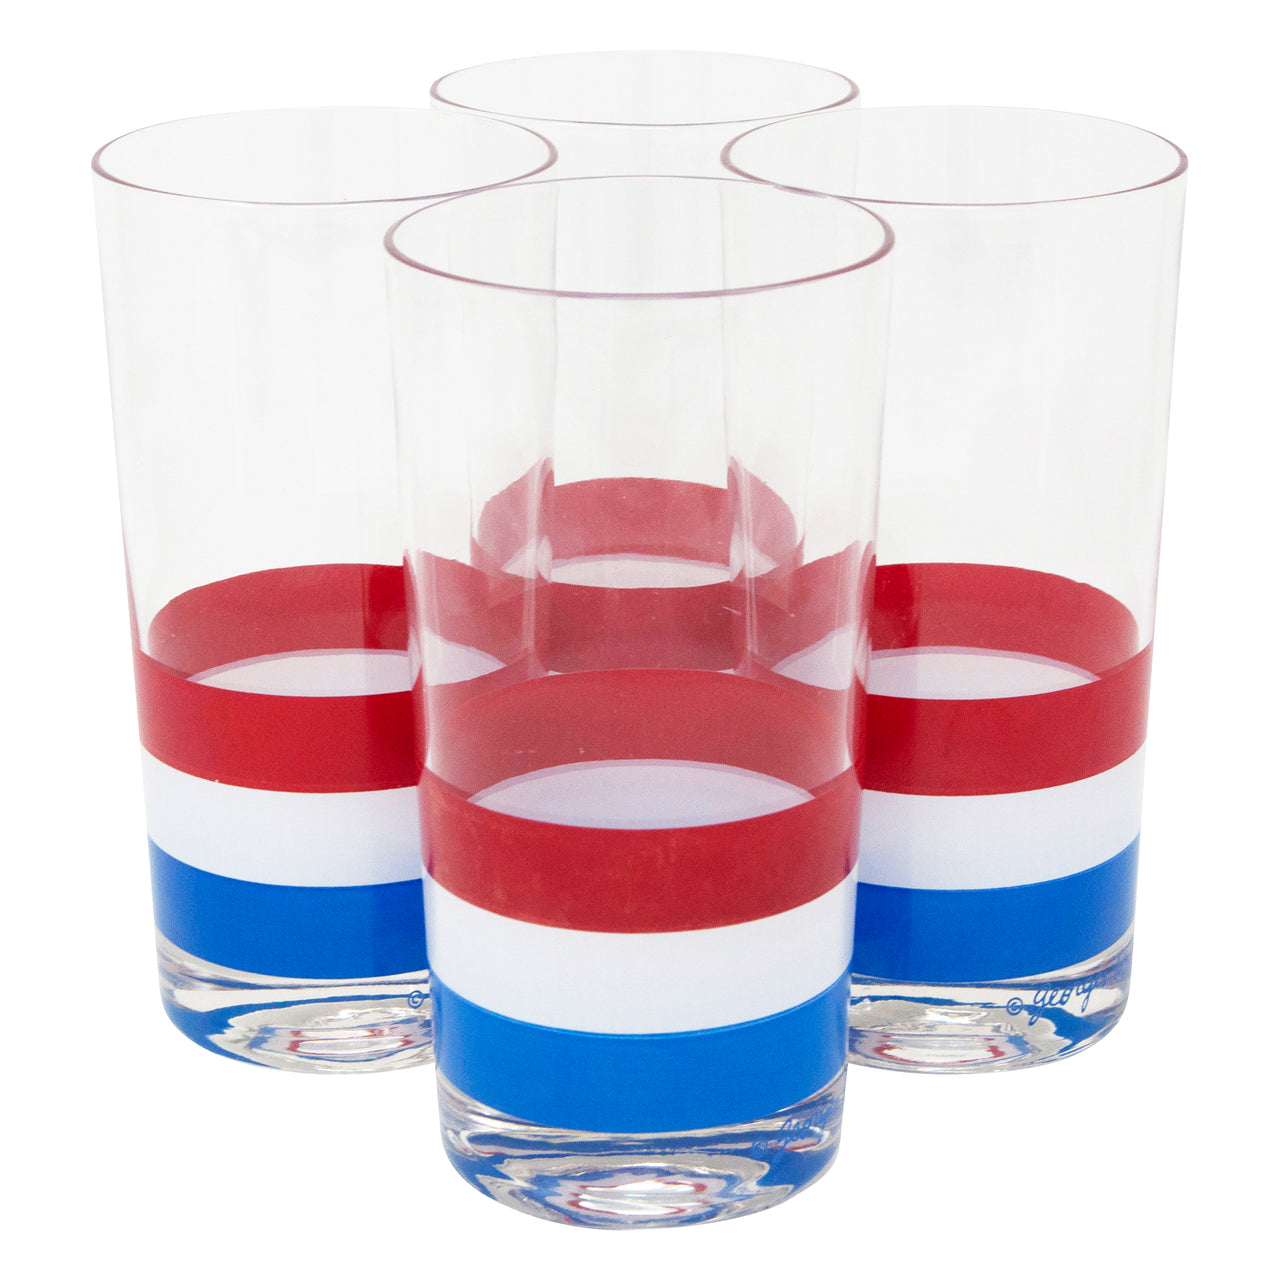 https://thehourshop.com/cdn/shop/products/1350-Vintage-Georges-Briard-Red-White-Blue-Bands-Collins-Glasses_1280x1280.jpg?v=1587309945